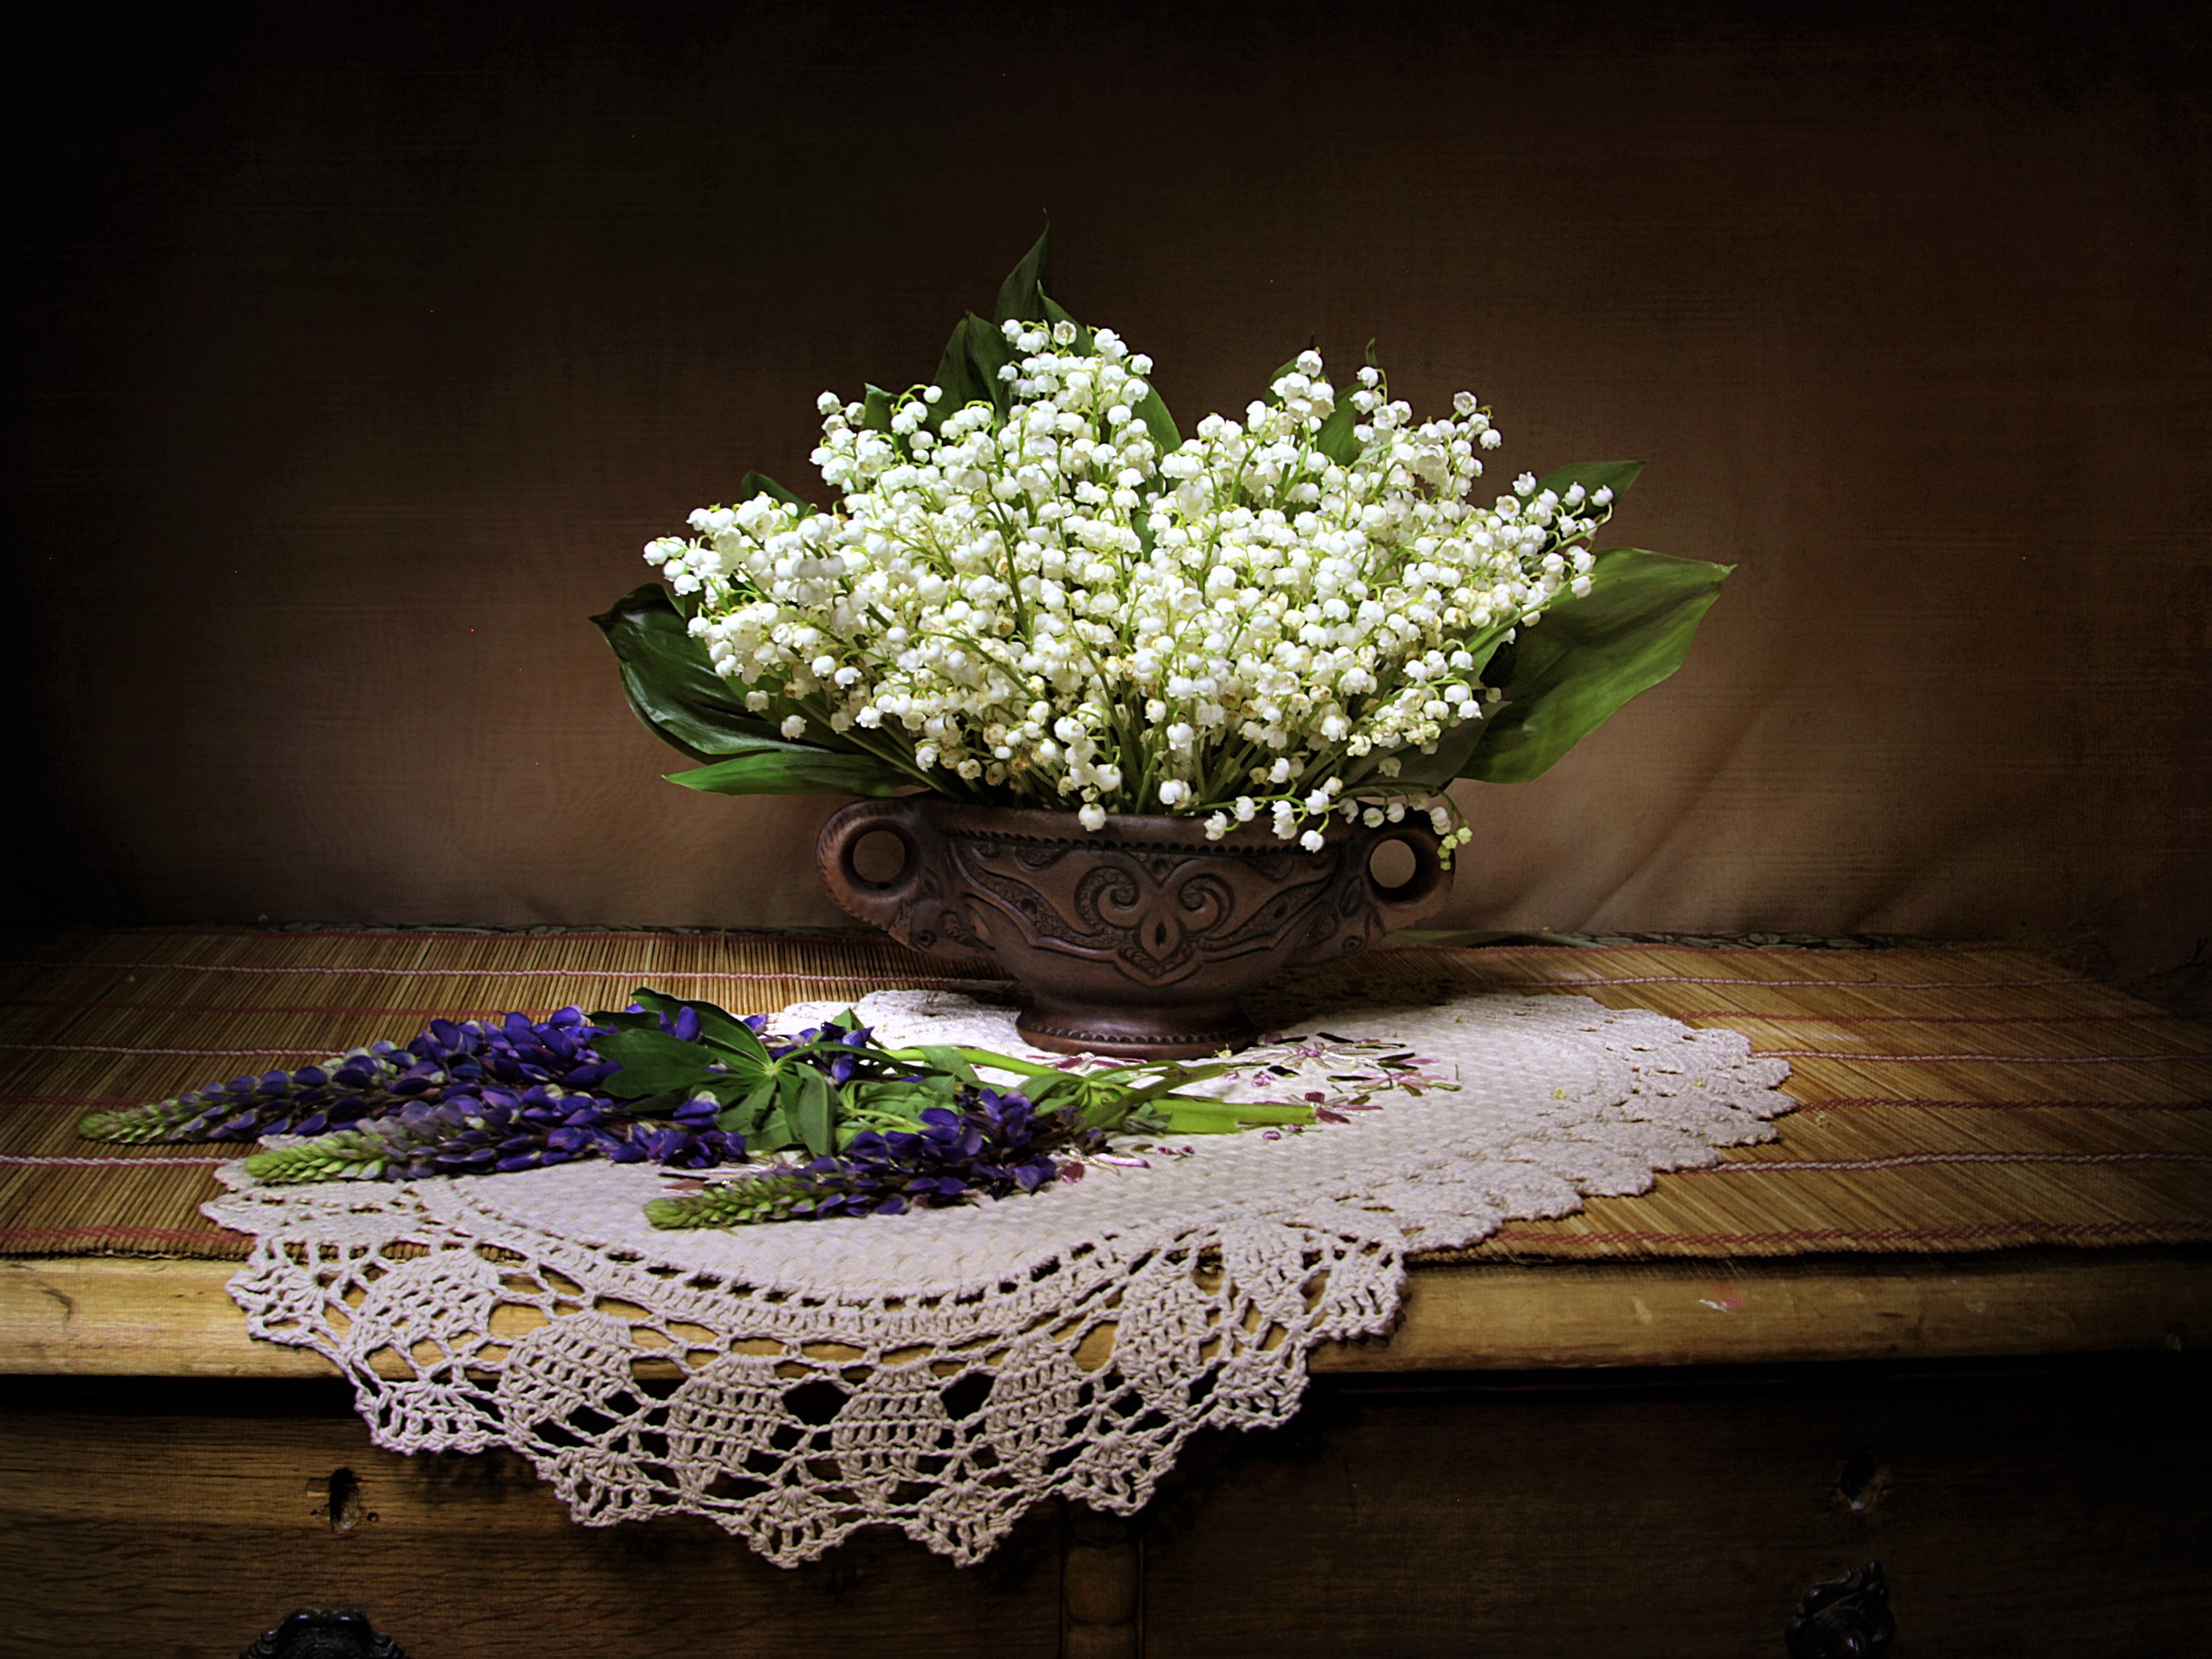 lily of the valley, photography, still life, bowl, white flower